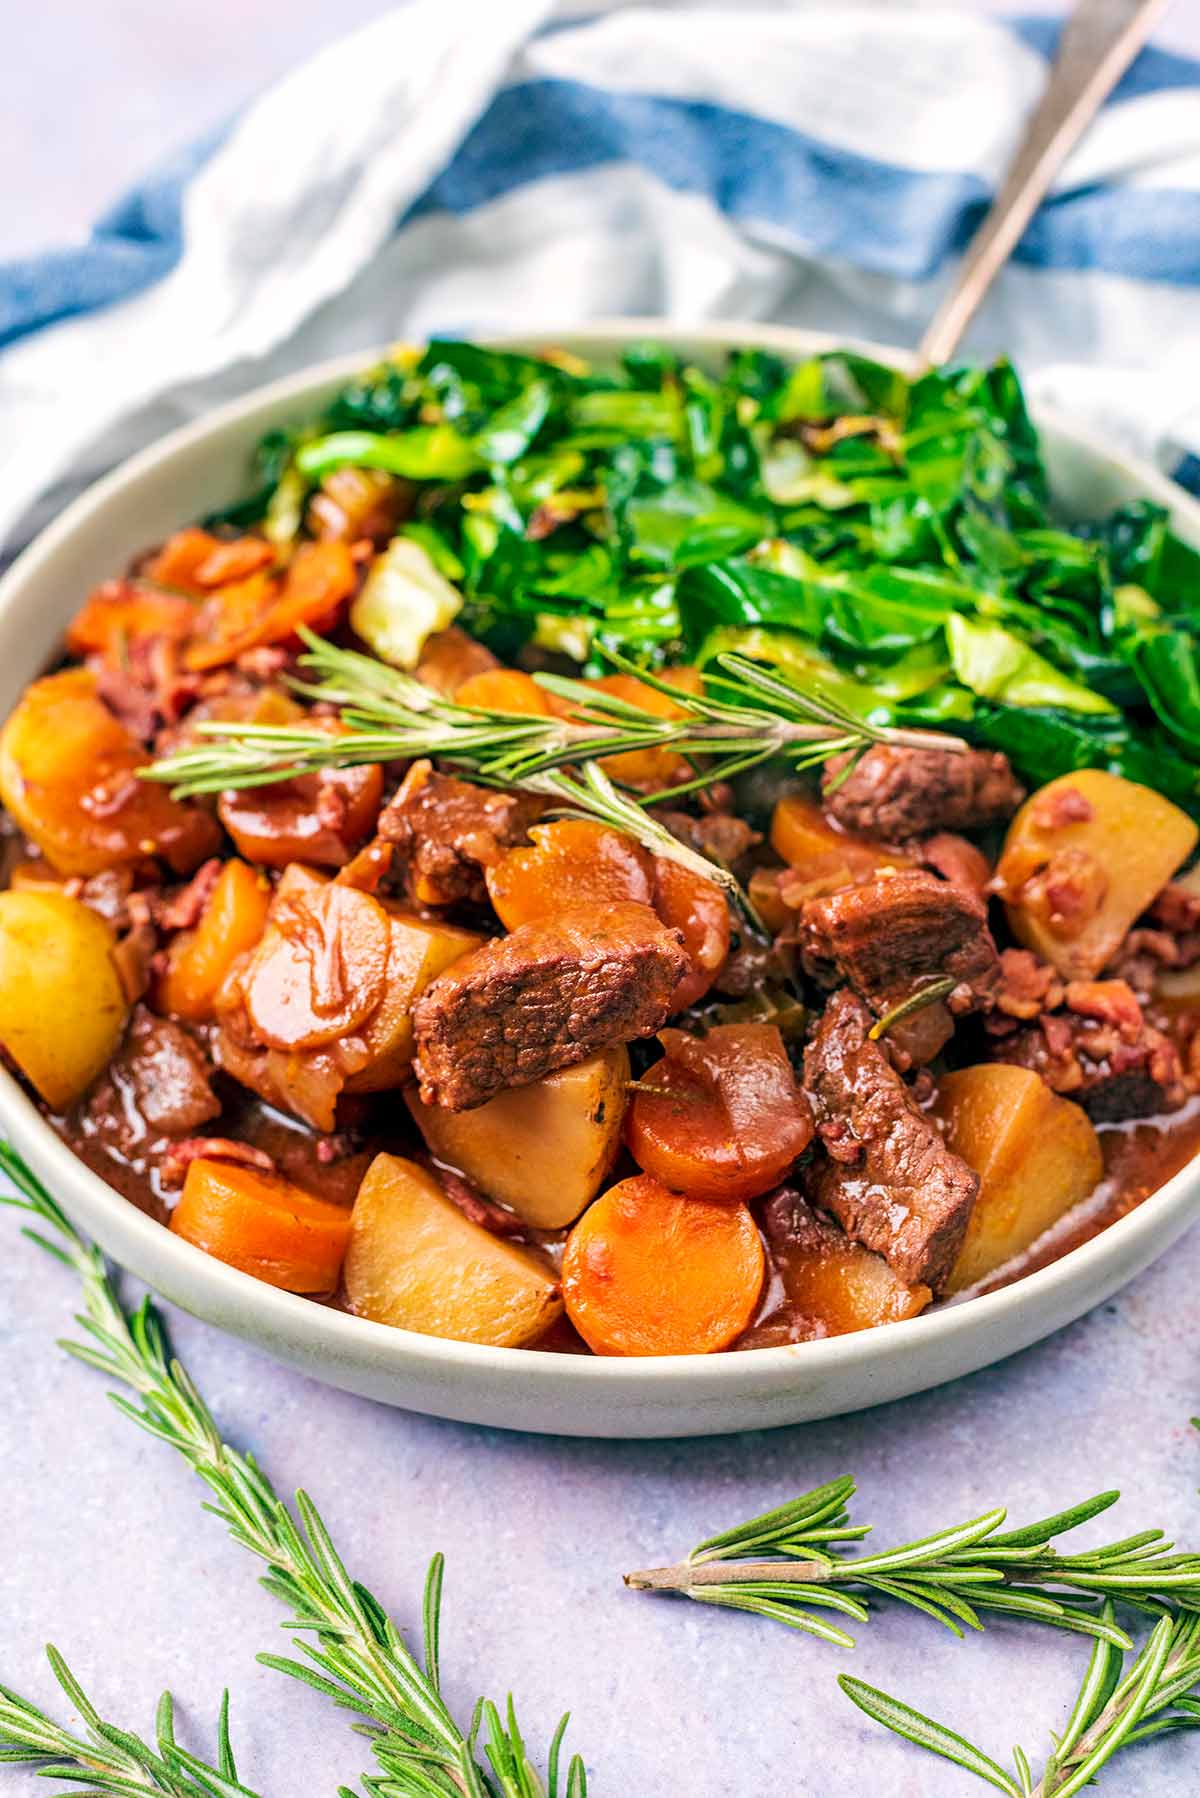 Beef bourguignon and cooked greens in a bowl in front of a blue and white towel.